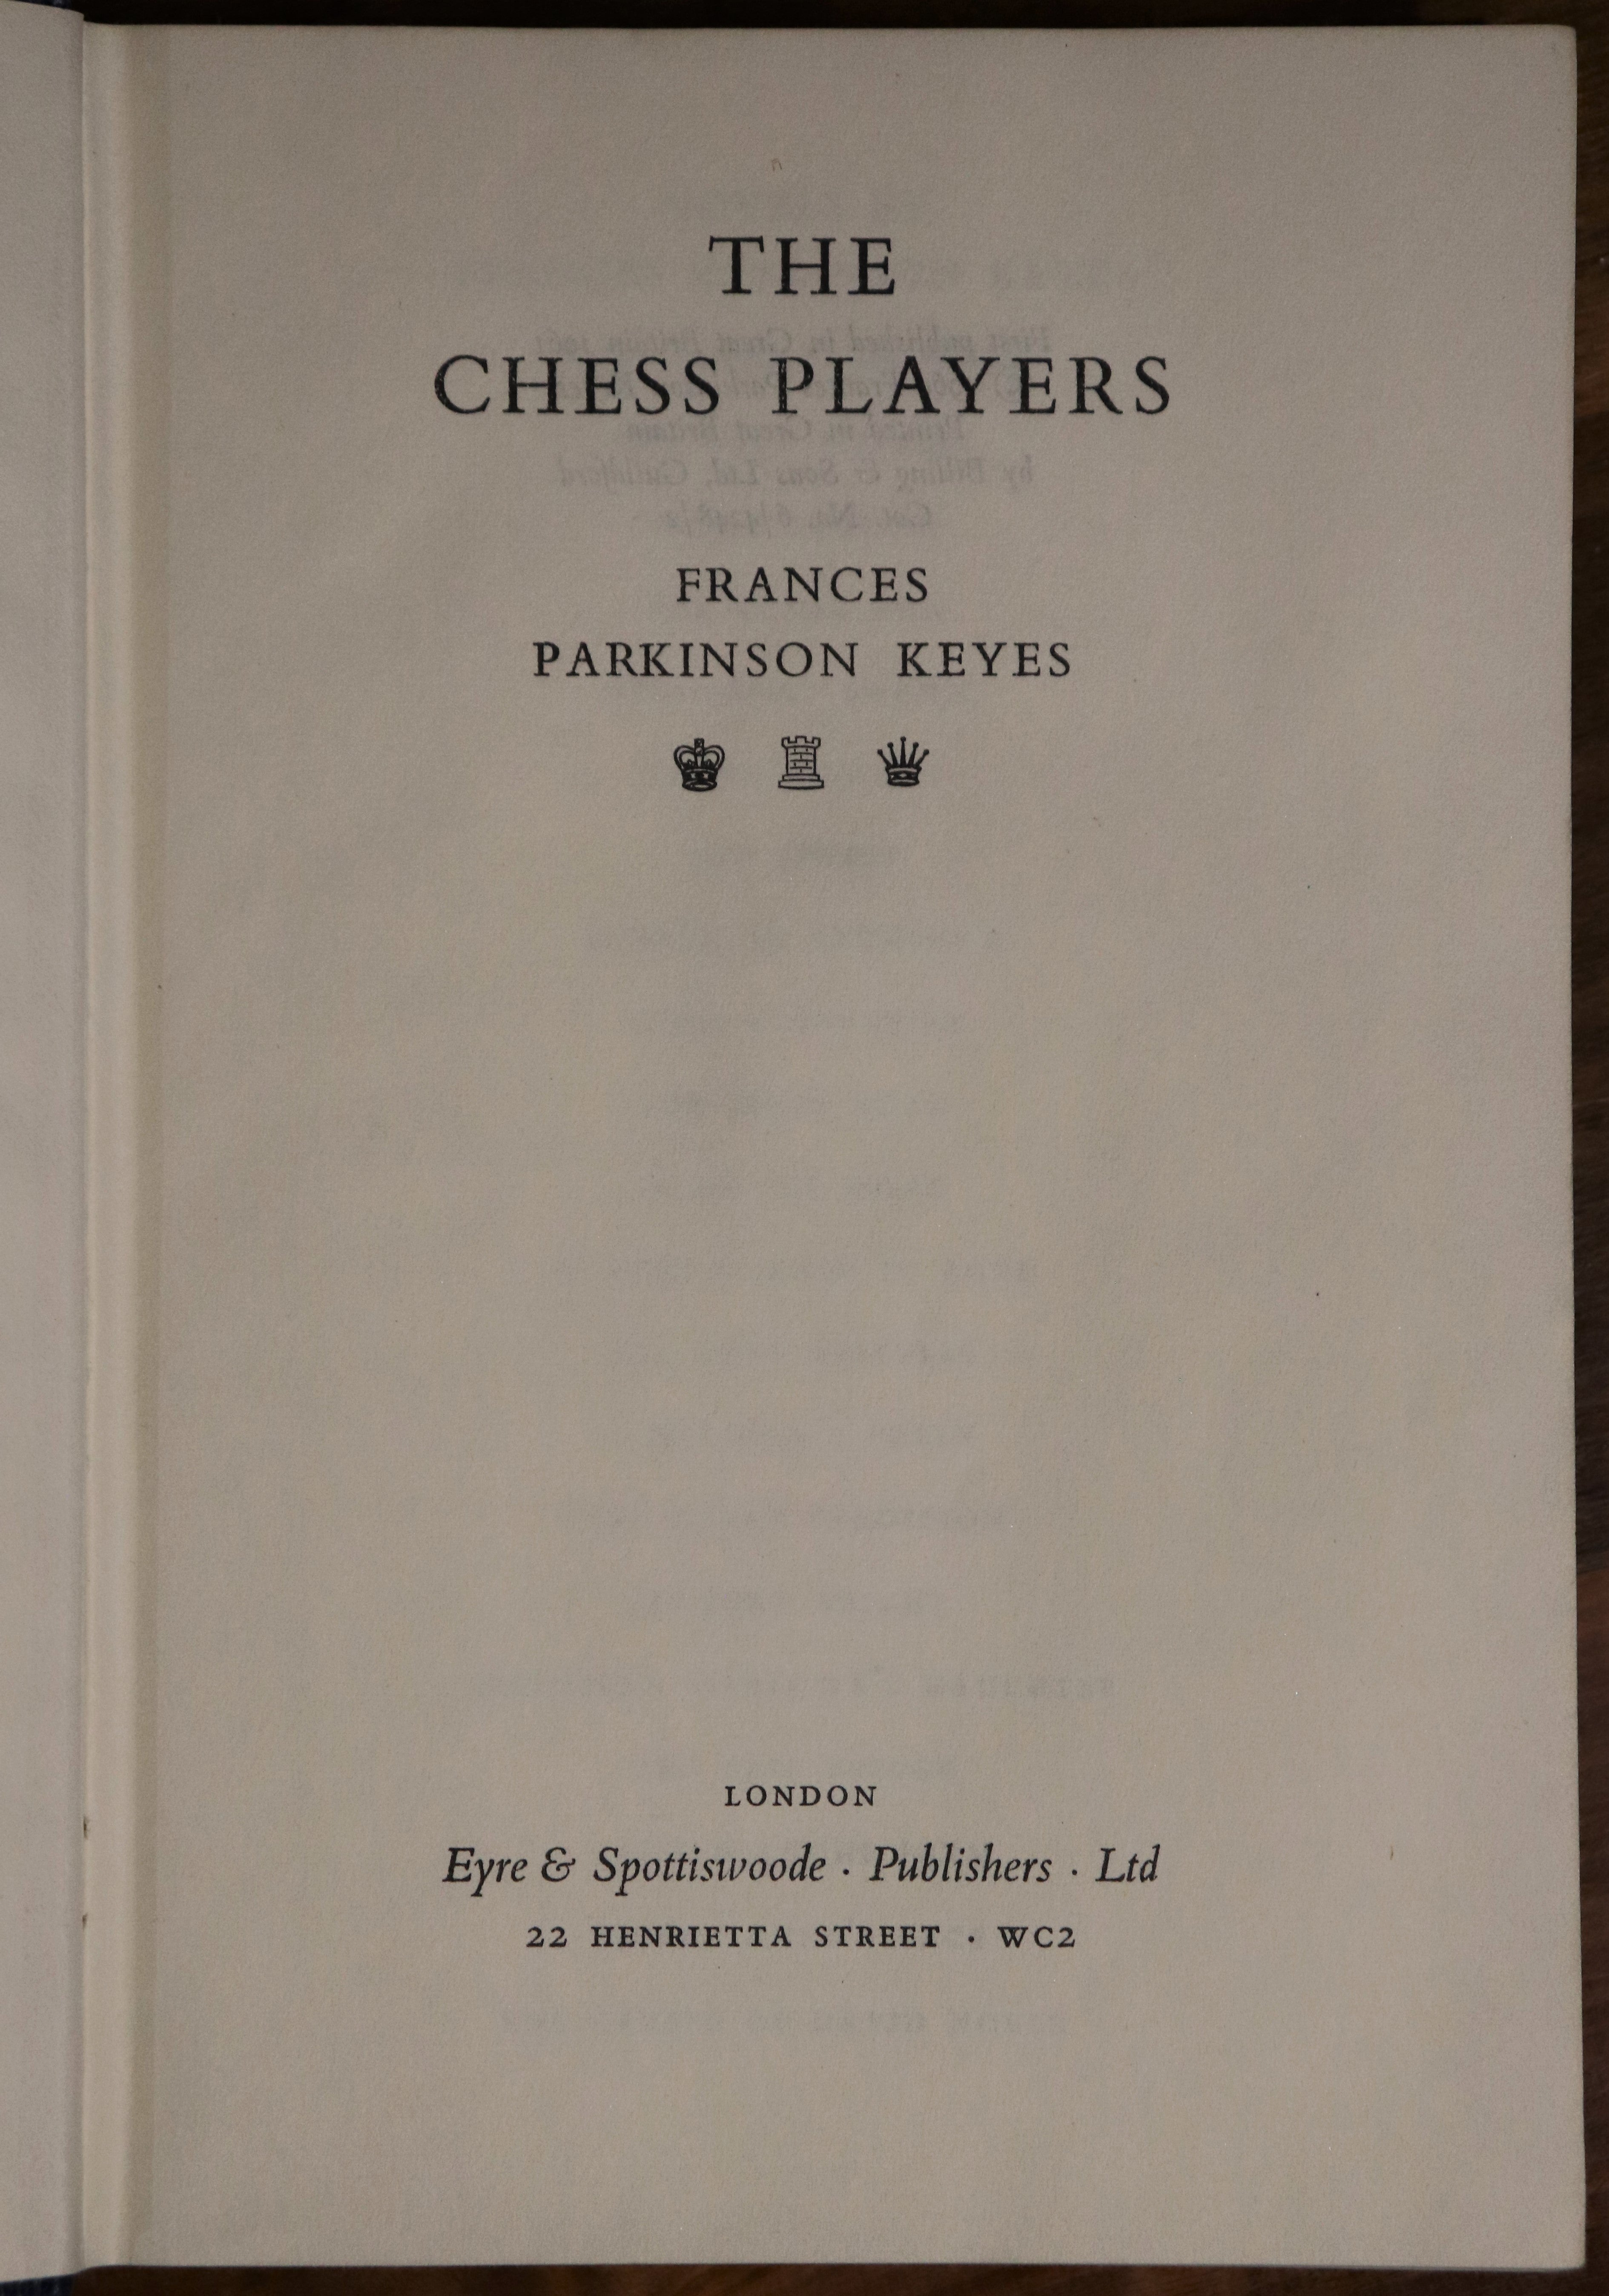 The Chess Players by FP Keyes - 1961 - 1st Edition Vintage Literature Book - 0